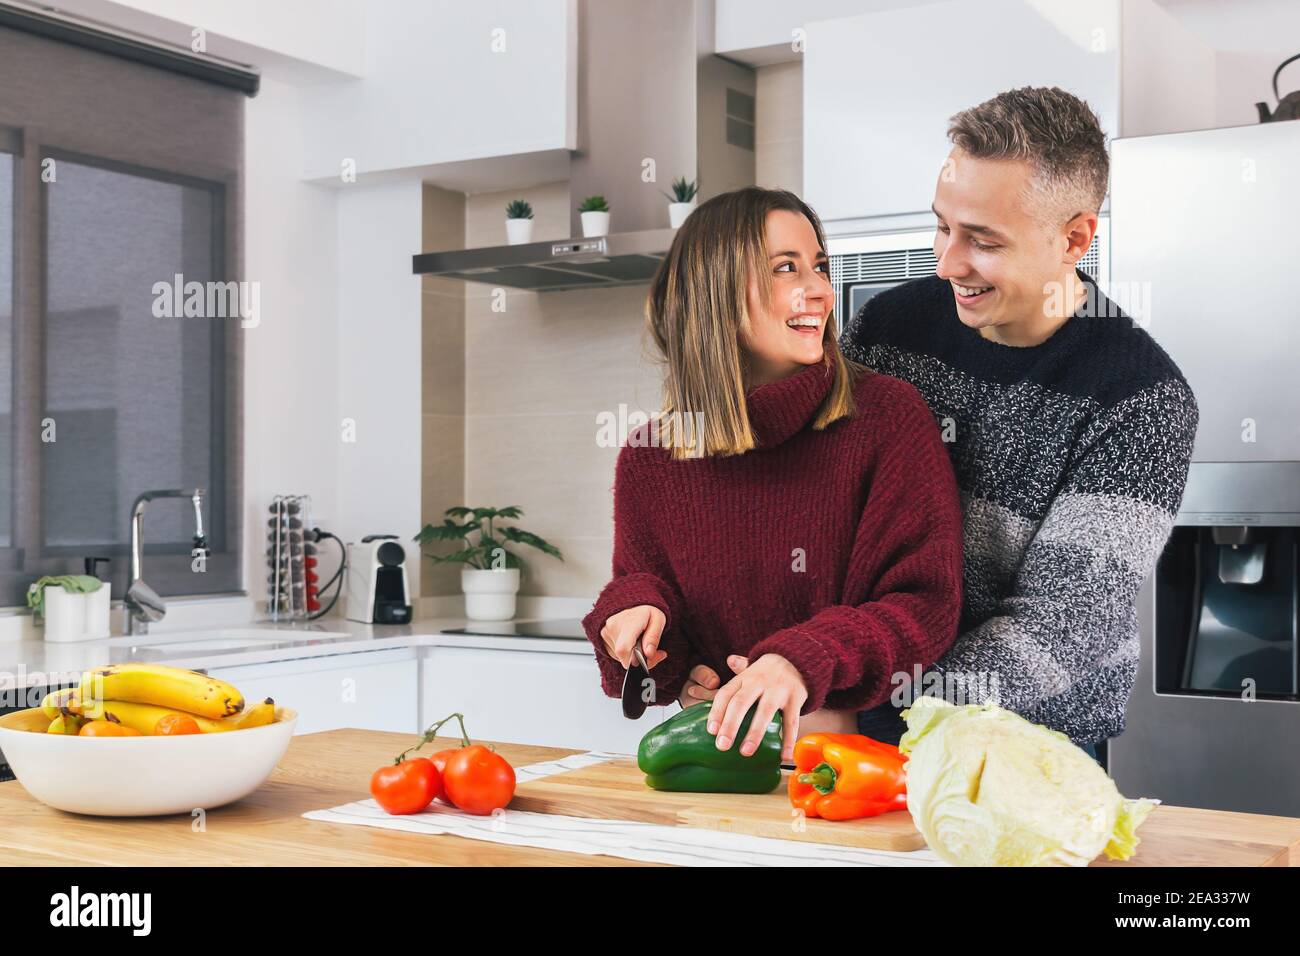 Portrait of happy young couple in love cooking vegan food together in a modern kitchen. Preparing healthy meal, cutting vegetables Stock Photo